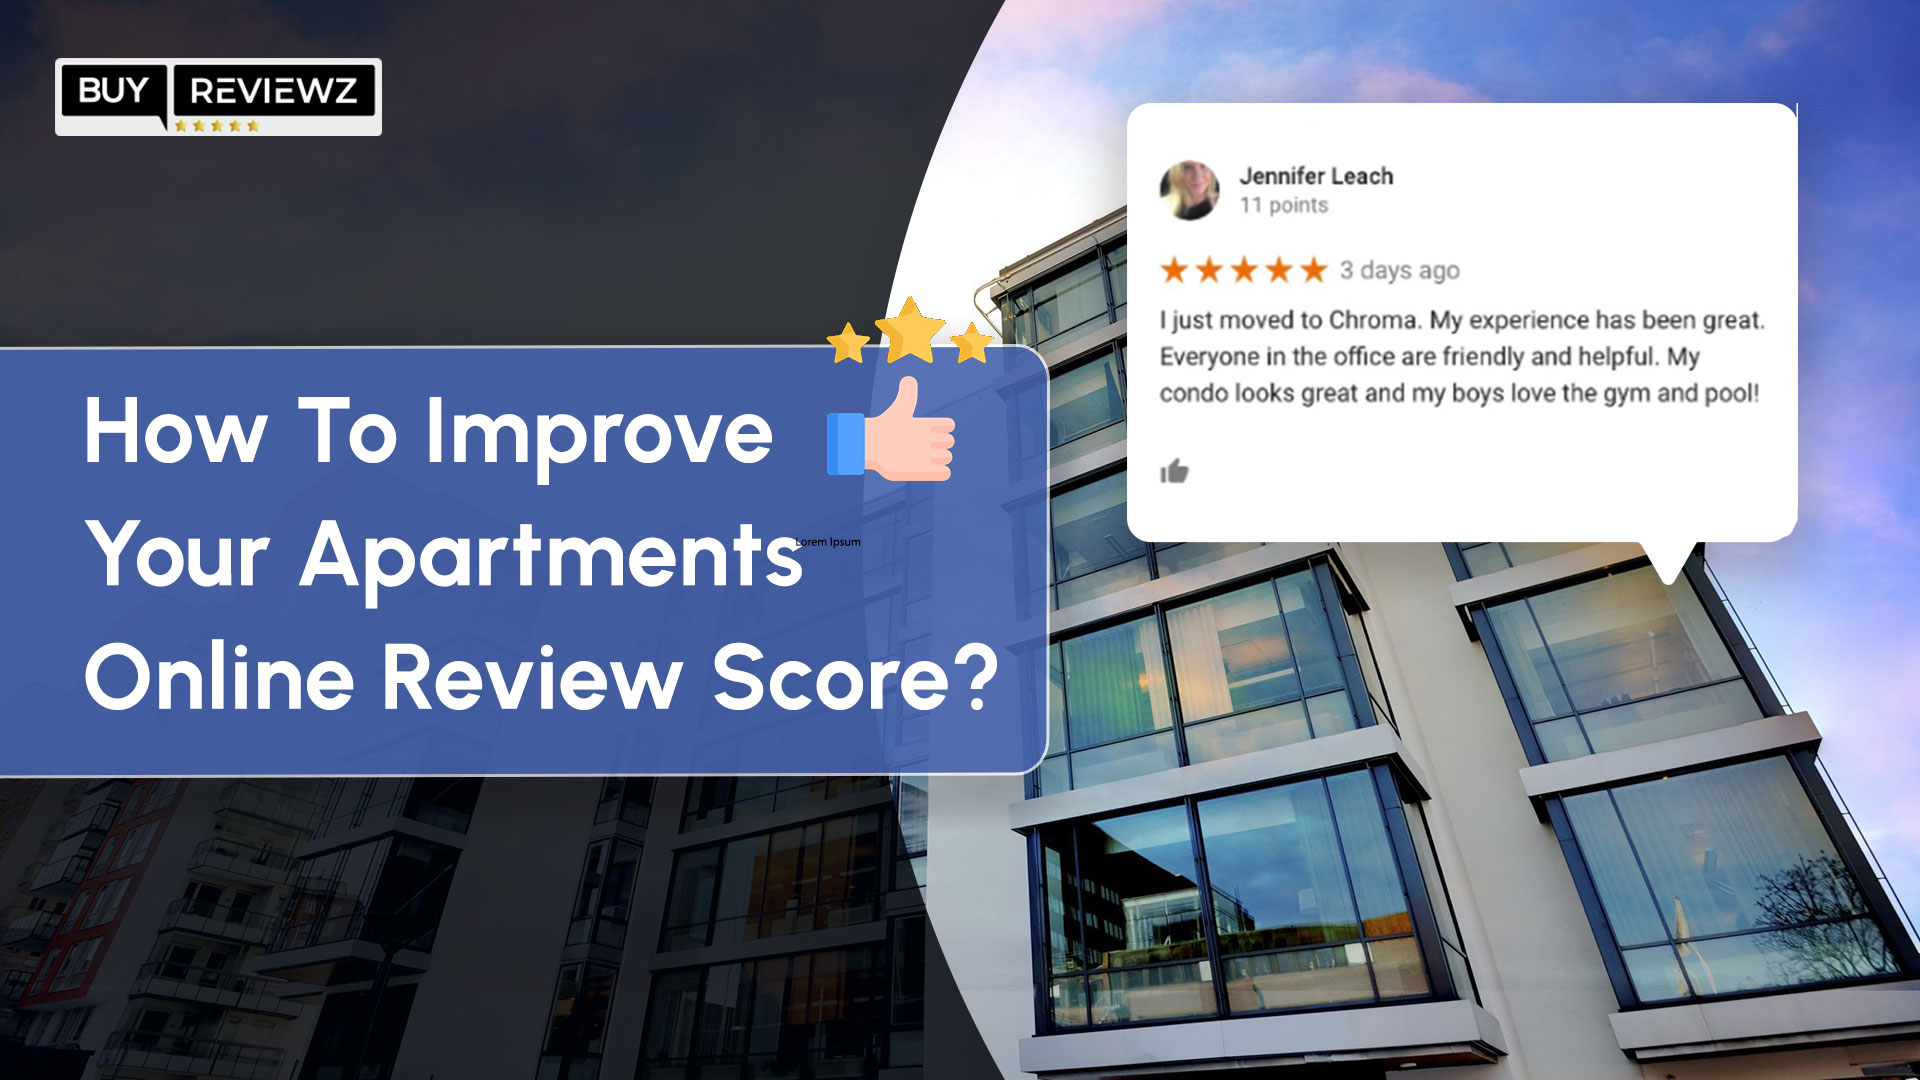 How To Improve Your Apartments Online Review Score